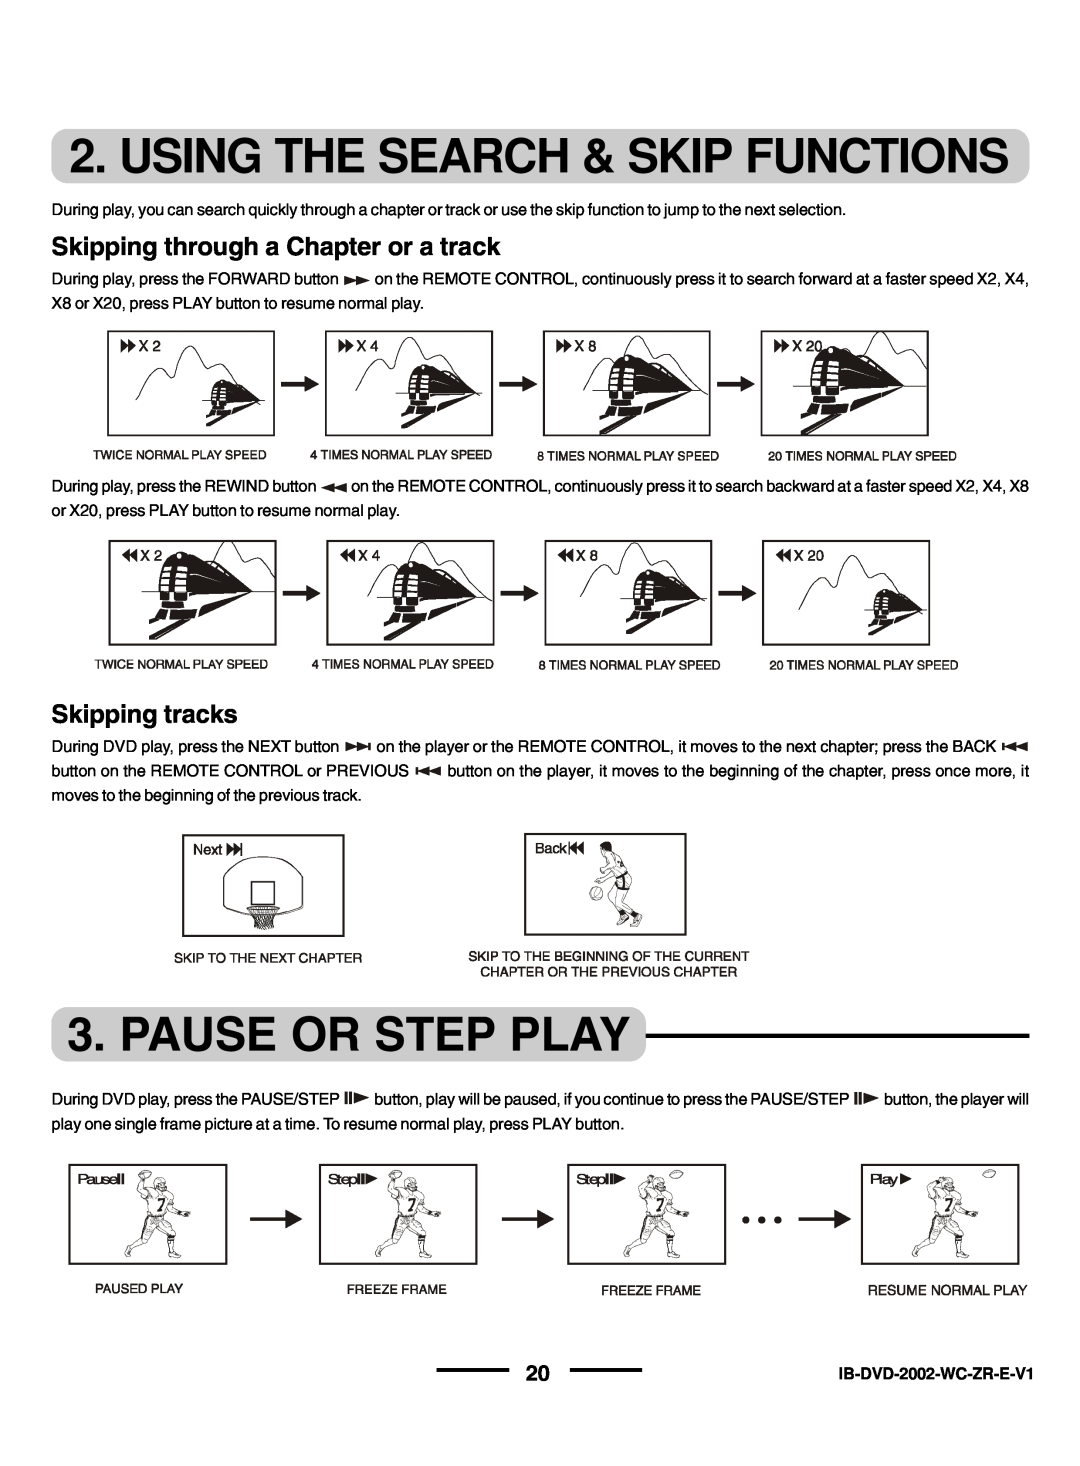 Lenoxx Electronics DVD-2002 Using The Search & Skip Functions, Pause Or Step Play, Skipping through a Chapter or a track 